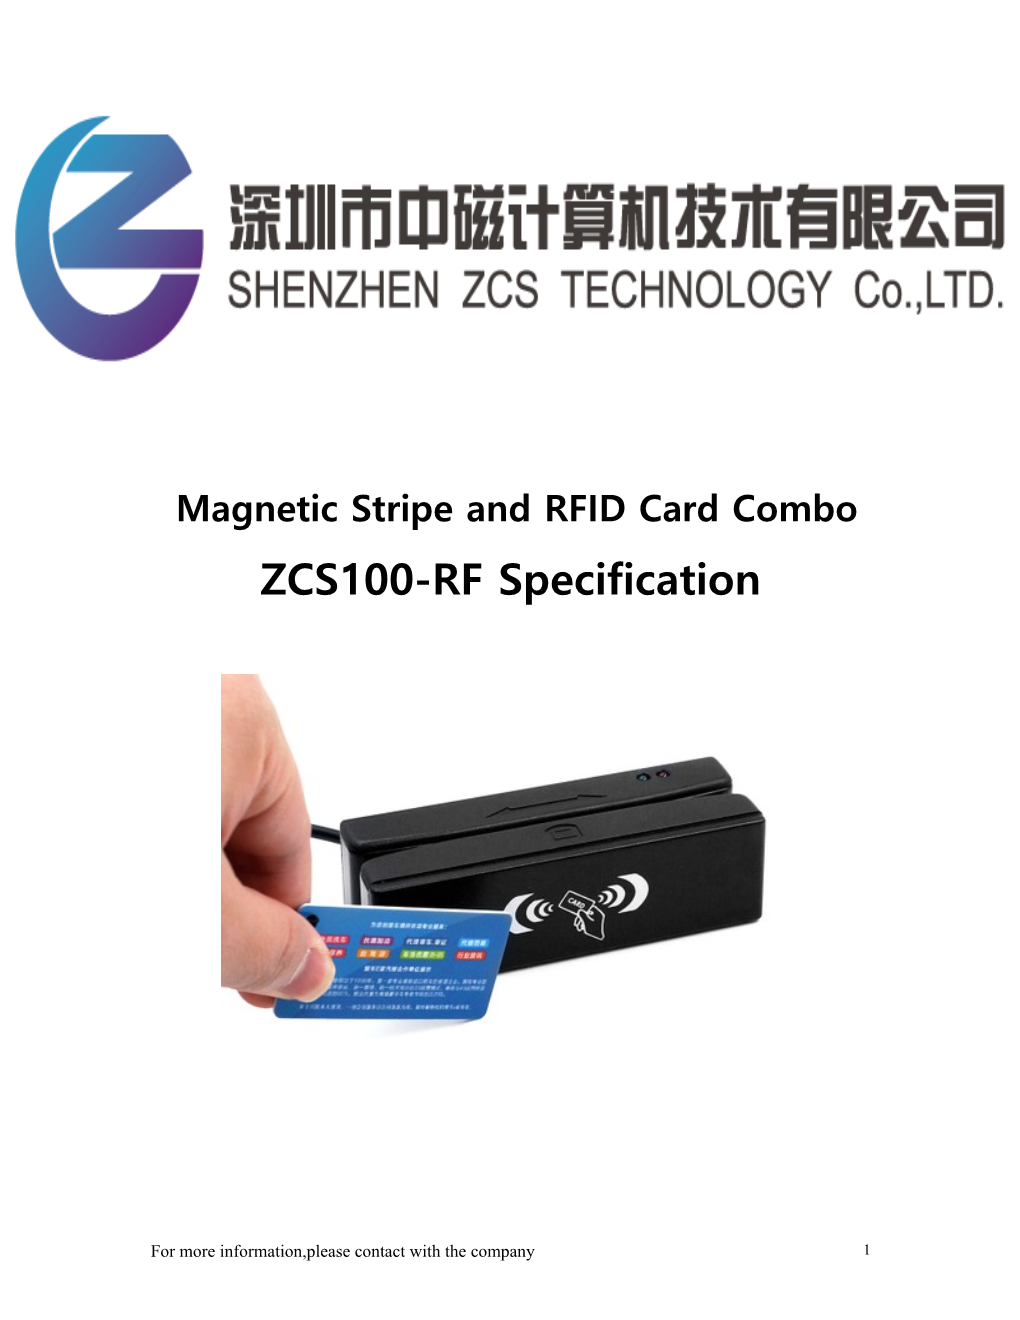 Magnetic Stripe and RFID Card Combo